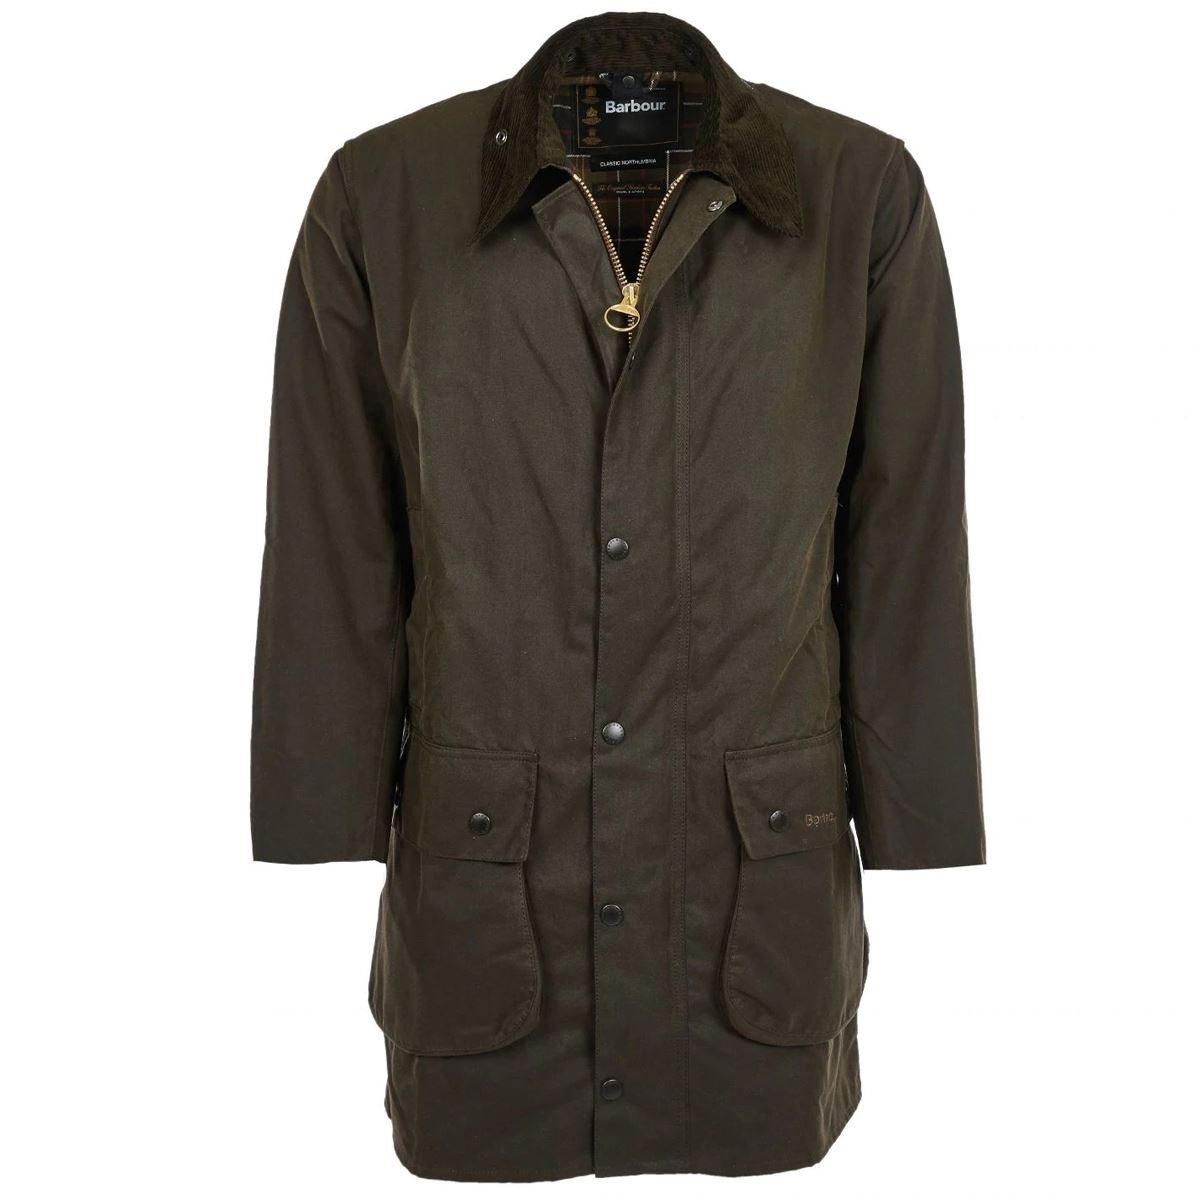 What's the best way to care for my Barbour Northumbria Wax Jacket?